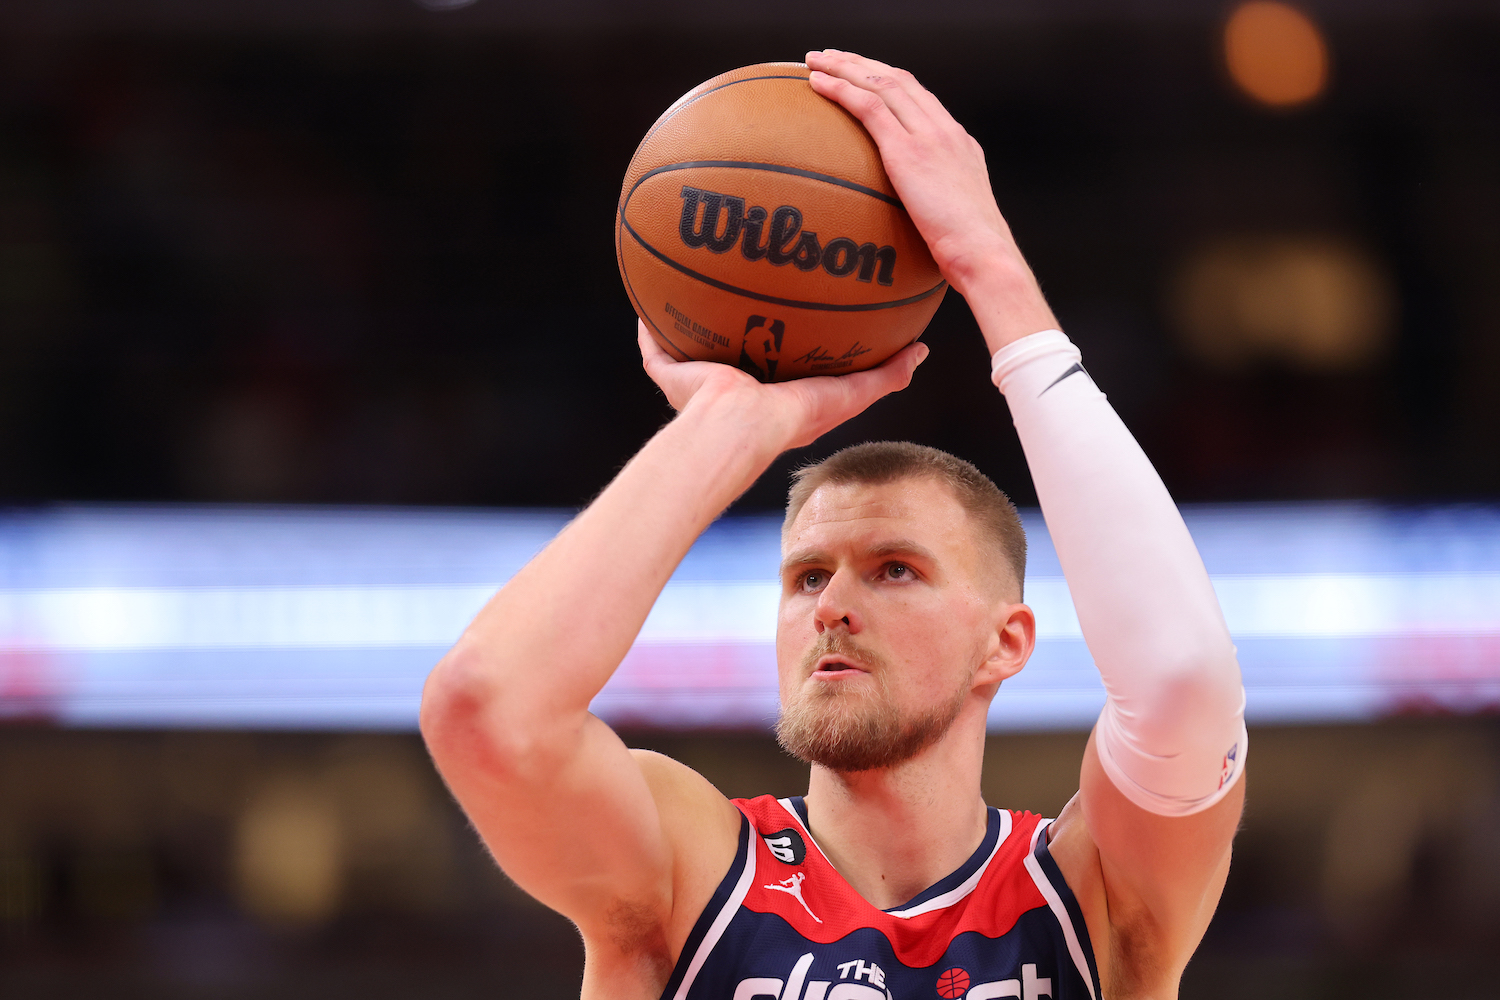 CHICAGO, ILLINOIS - DECEMBER 07: Kristaps Porzingis #6 of the Washington Wizards shoots a free throw against the Chicago Bulls during the second half at United Center on December 07, 2022 in Chicago, Illinois. NOTE TO USER: User expressly acknowledges and agrees that, by downloading and or using this photograph, User is consenting to the terms and conditions of the Getty Images License Agreement. (Photo by Michael Reaves/Getty Images)